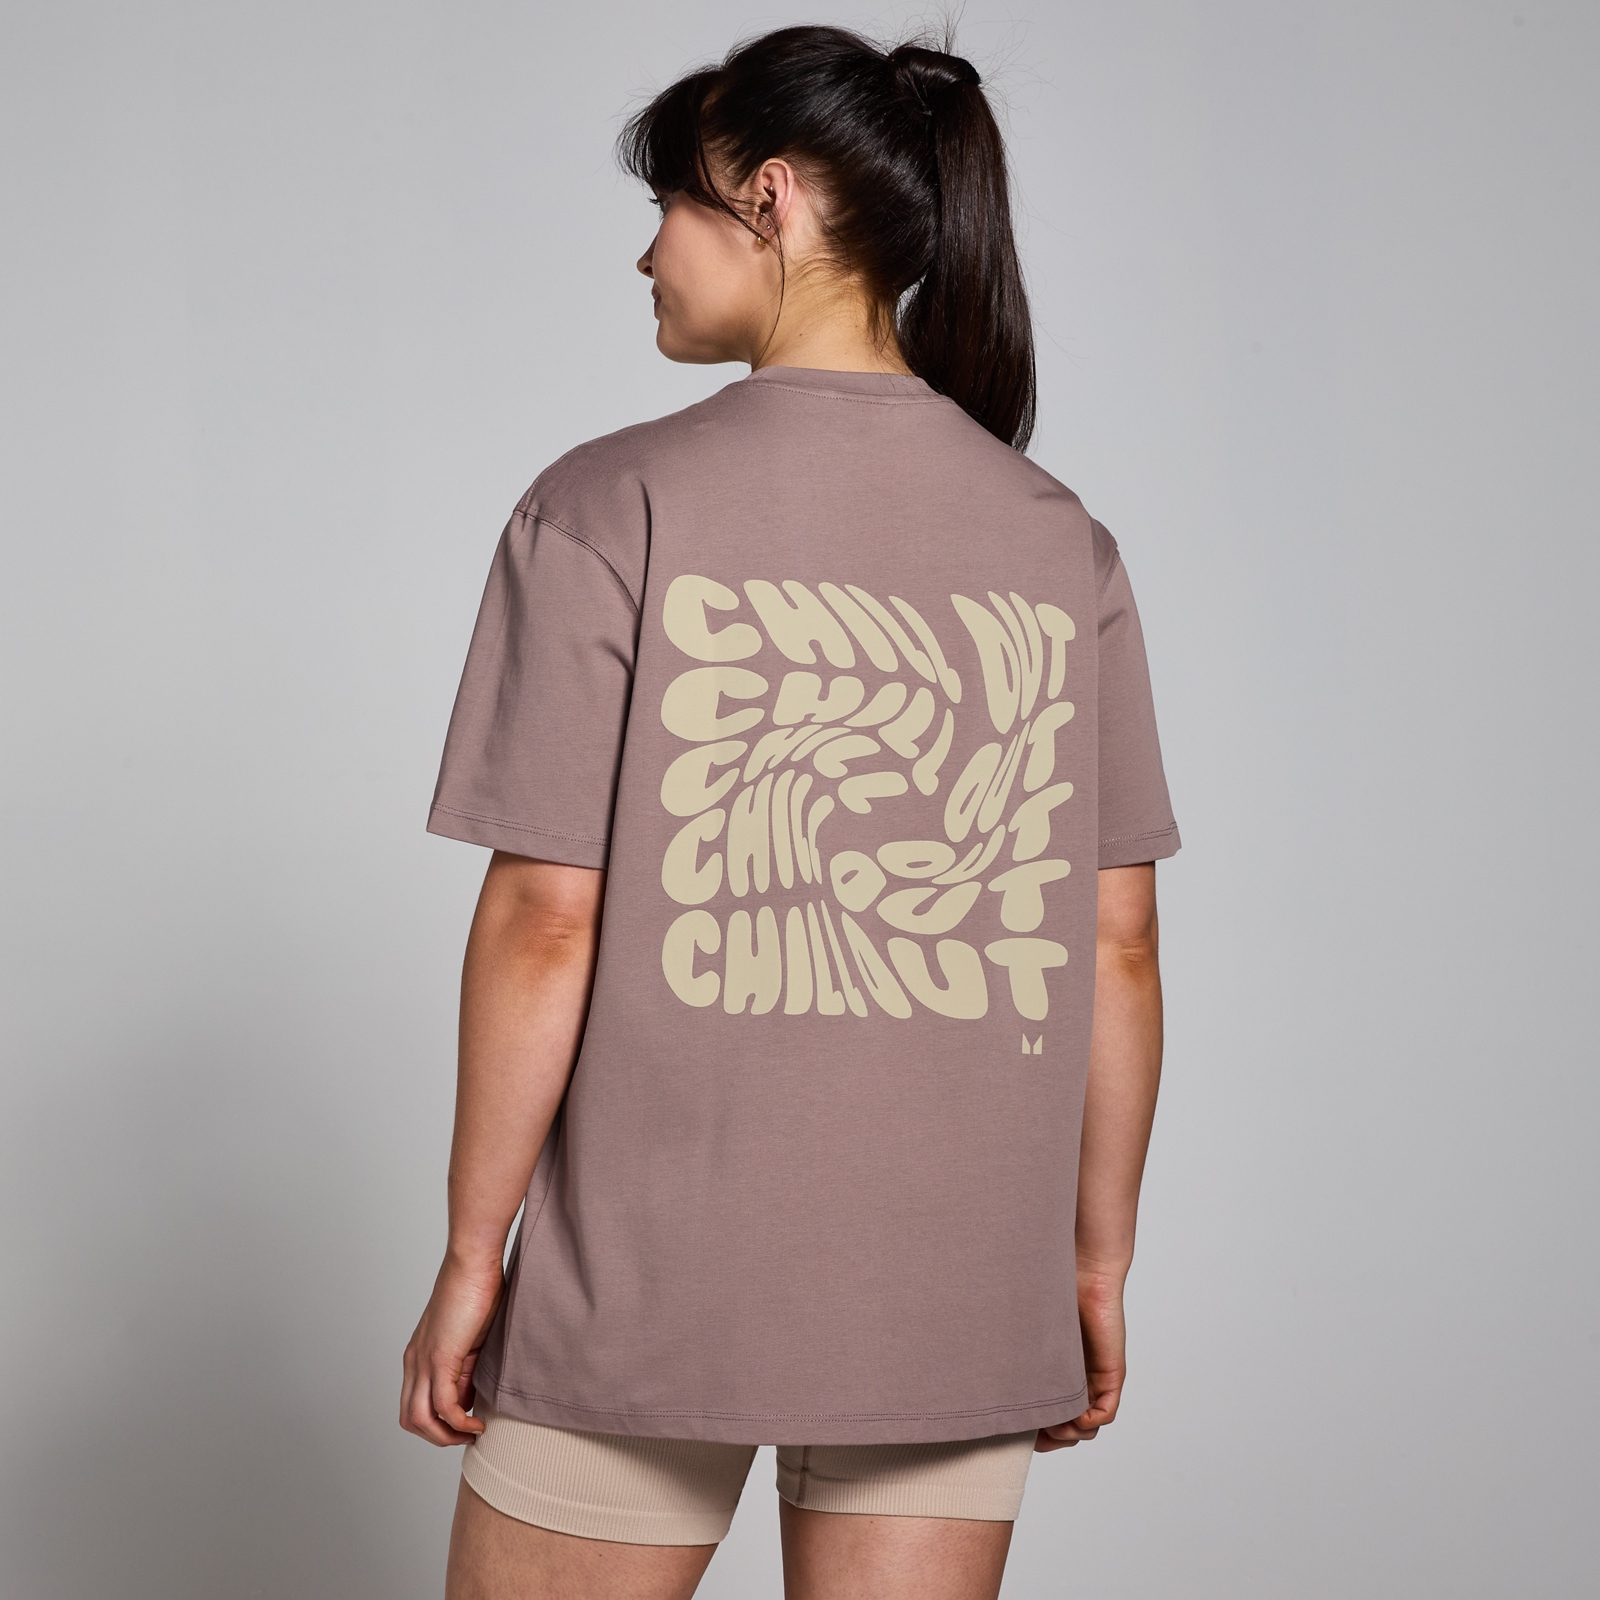 T-shirt MP Chill Out  - L - XL